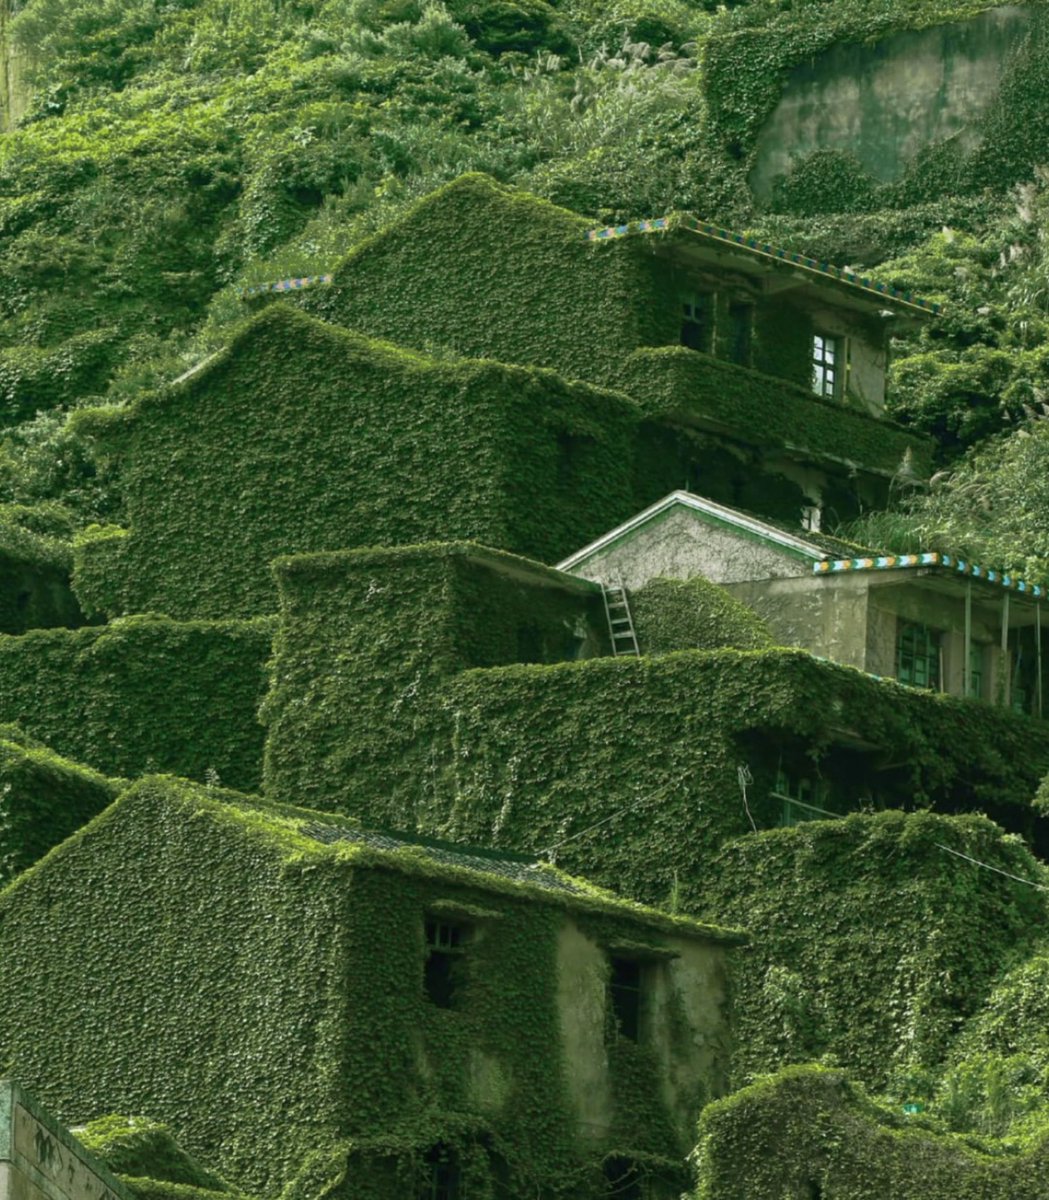 An abandoned fishing village on the island of Gouqi Island, China - completely reclaimed by nature